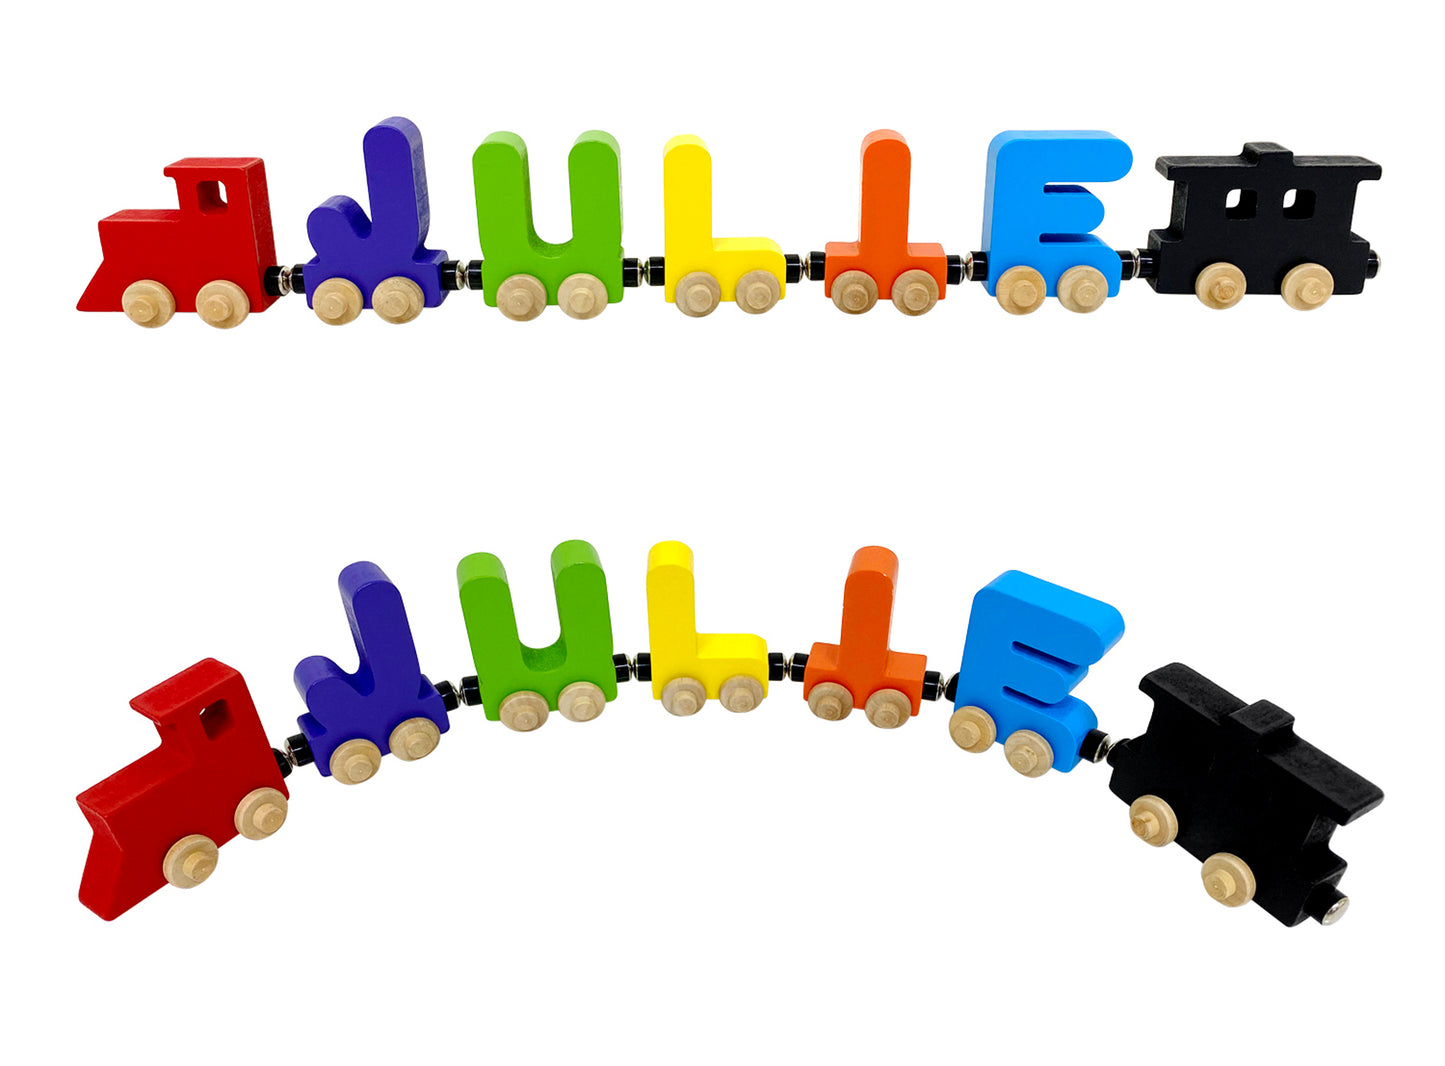 5 Letter Train Wooden Perosnalized Name Letters Includes Train & Wagon Letters Puzzle Includes Train & Wagon Free